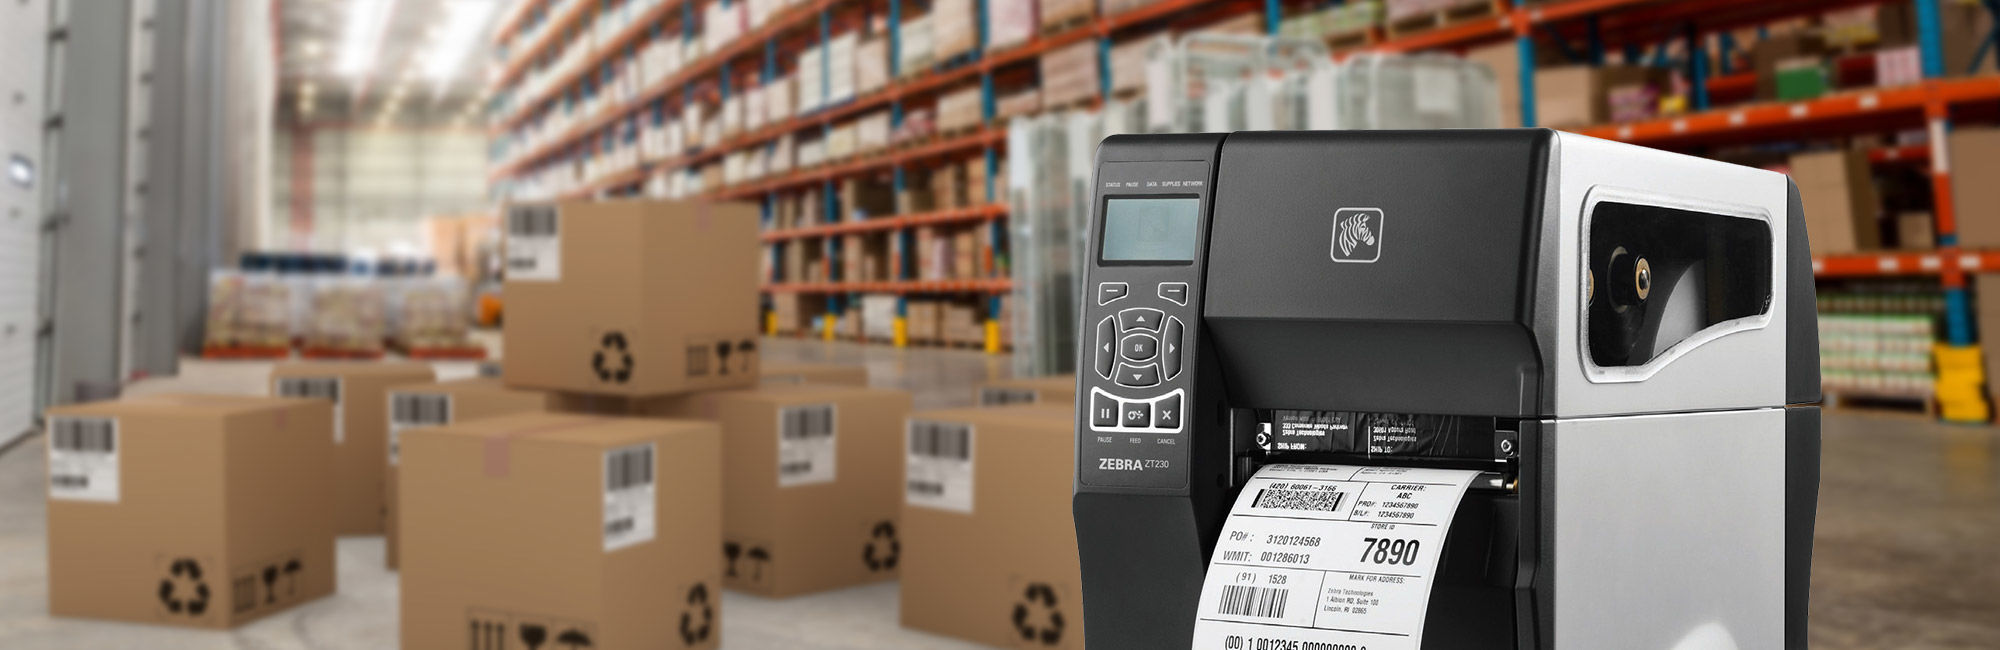 <div id='banner-caption-container'><h1 class='banner-caption'>Products & Repairs for</h1><div class='banner-description-and-button-container'>THERMAL PRINTERS <a class='banner-button' href='/Products.htm'>Learn More</a></div></div>